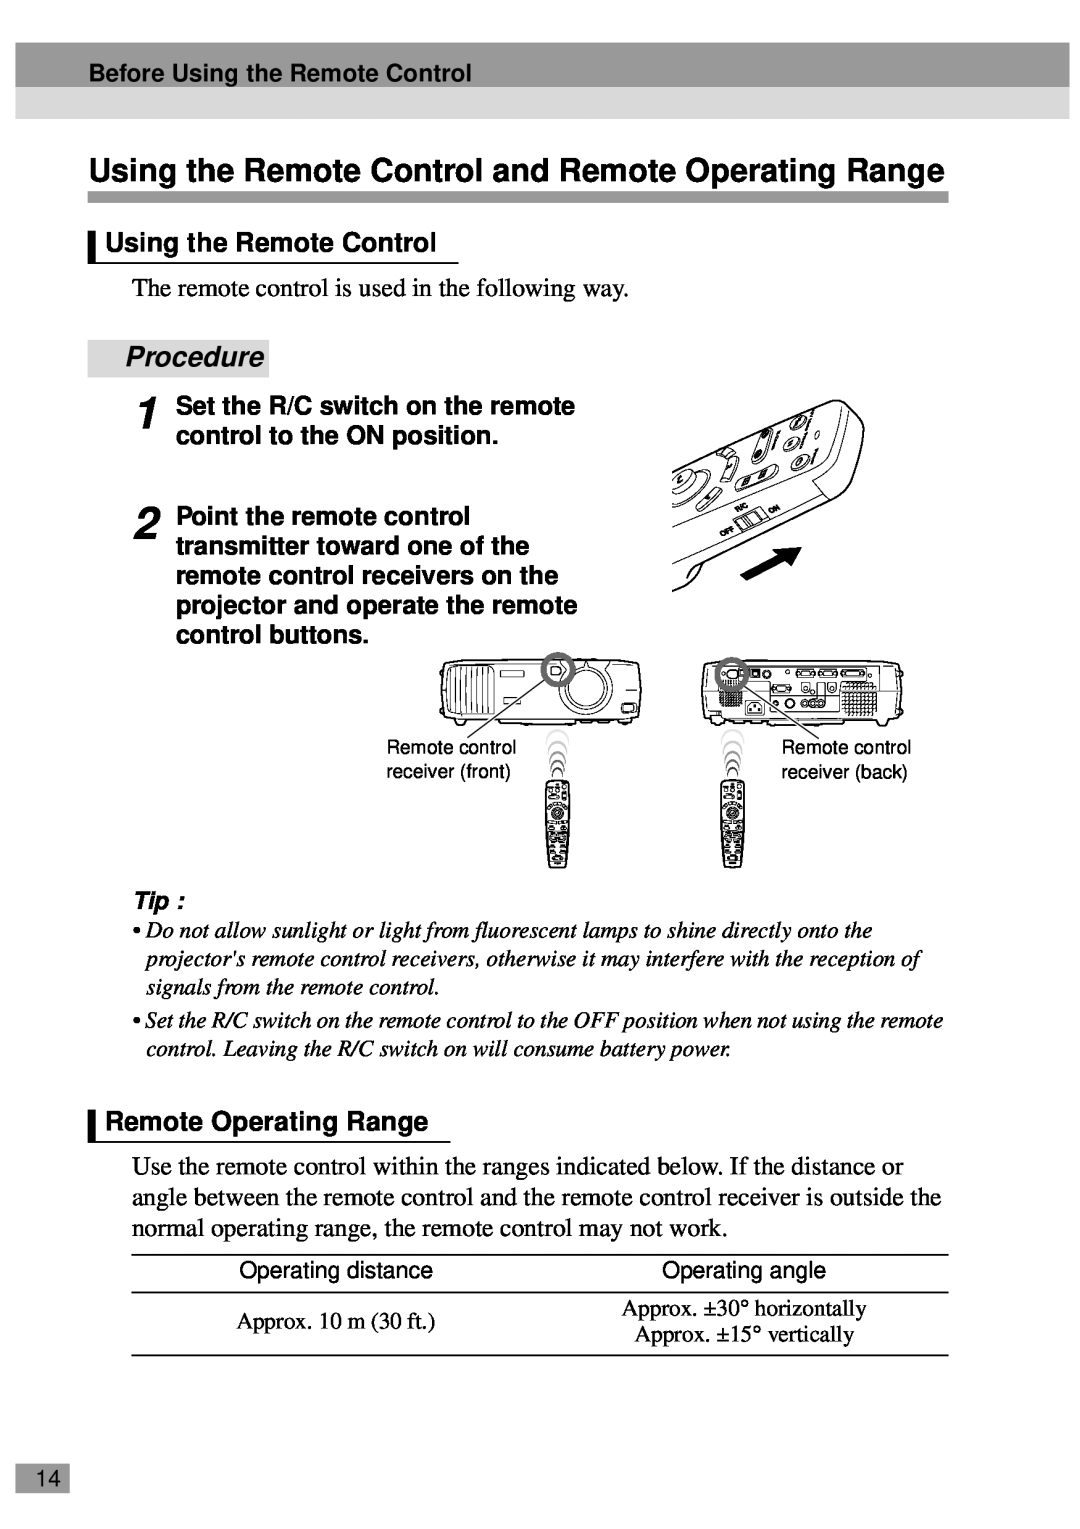 Epson EMP-800UG, ELP-811 Using the Remote Control and Remote Operating Range, Procedure, Before Using the Remote Control 